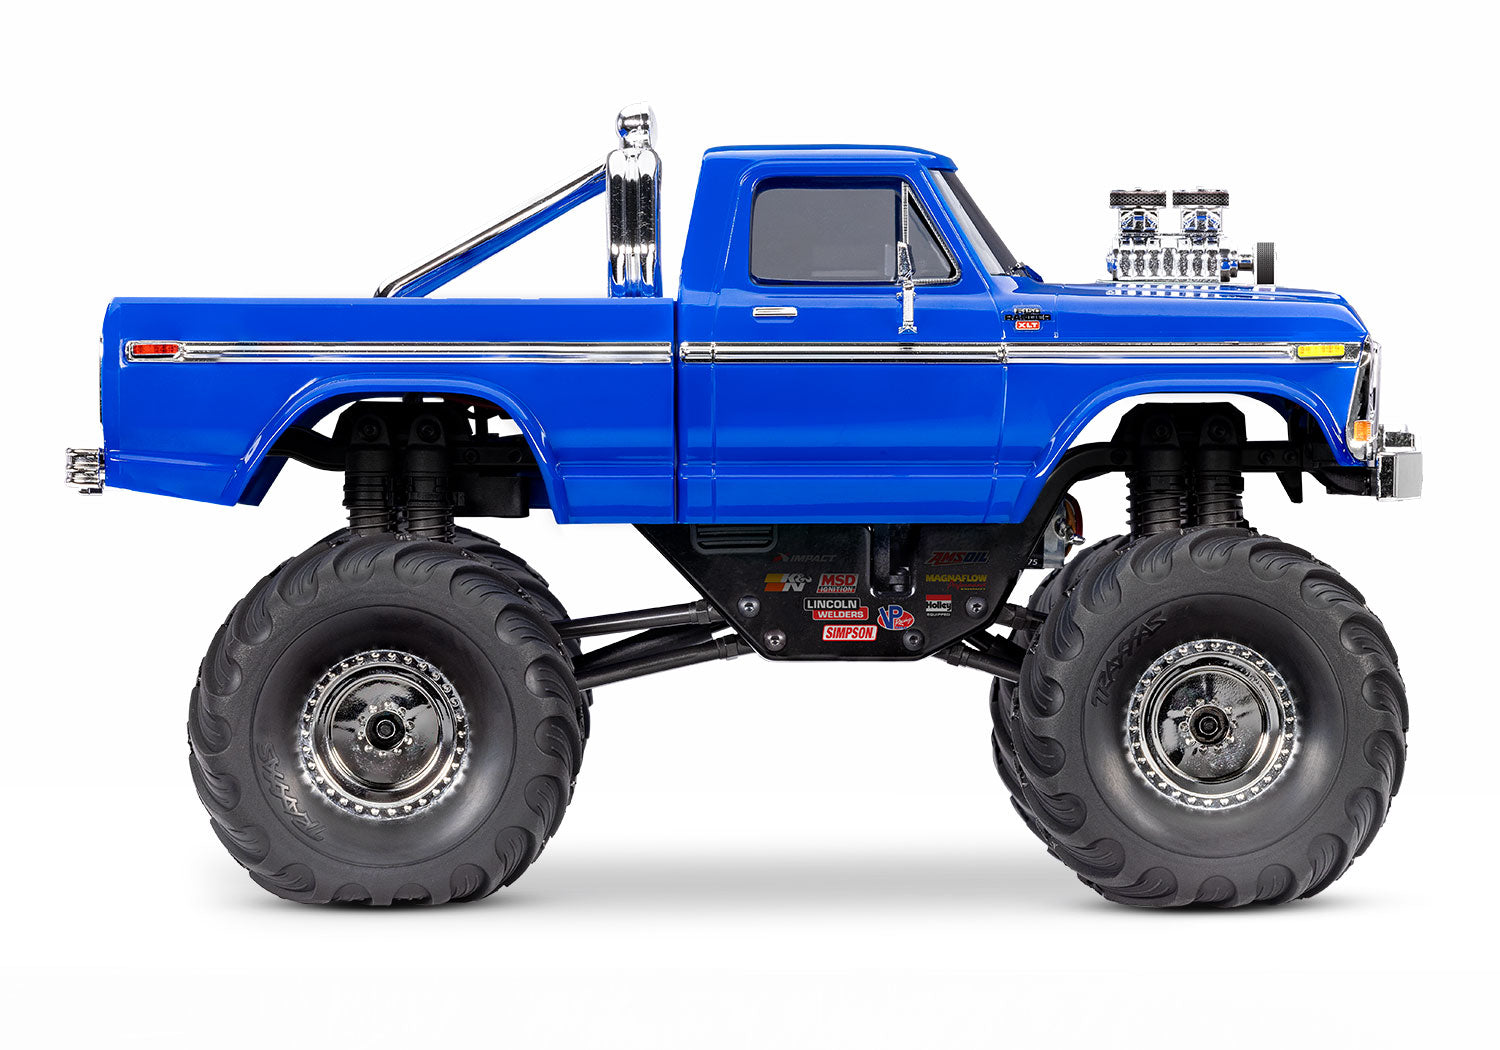 98044-1 TRX-4MT Ford F-150 Monster Truck **IN STORE PICK-UP ONLY**